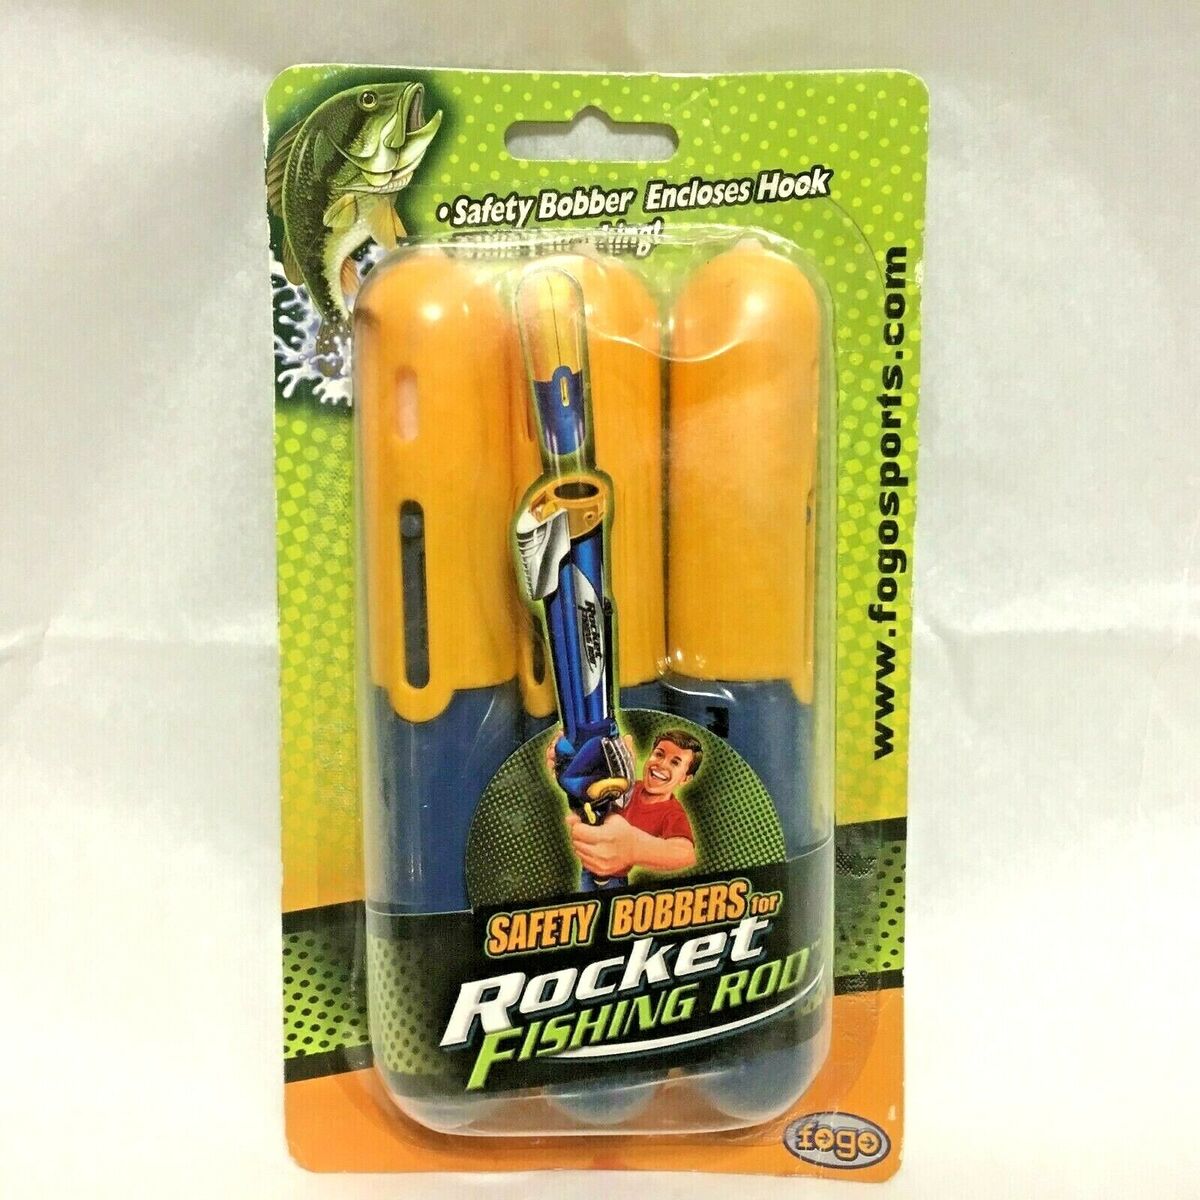 3pc Safety Bobbers for Rocket Fishing Rod by Spin Master, fogosports NEW !!